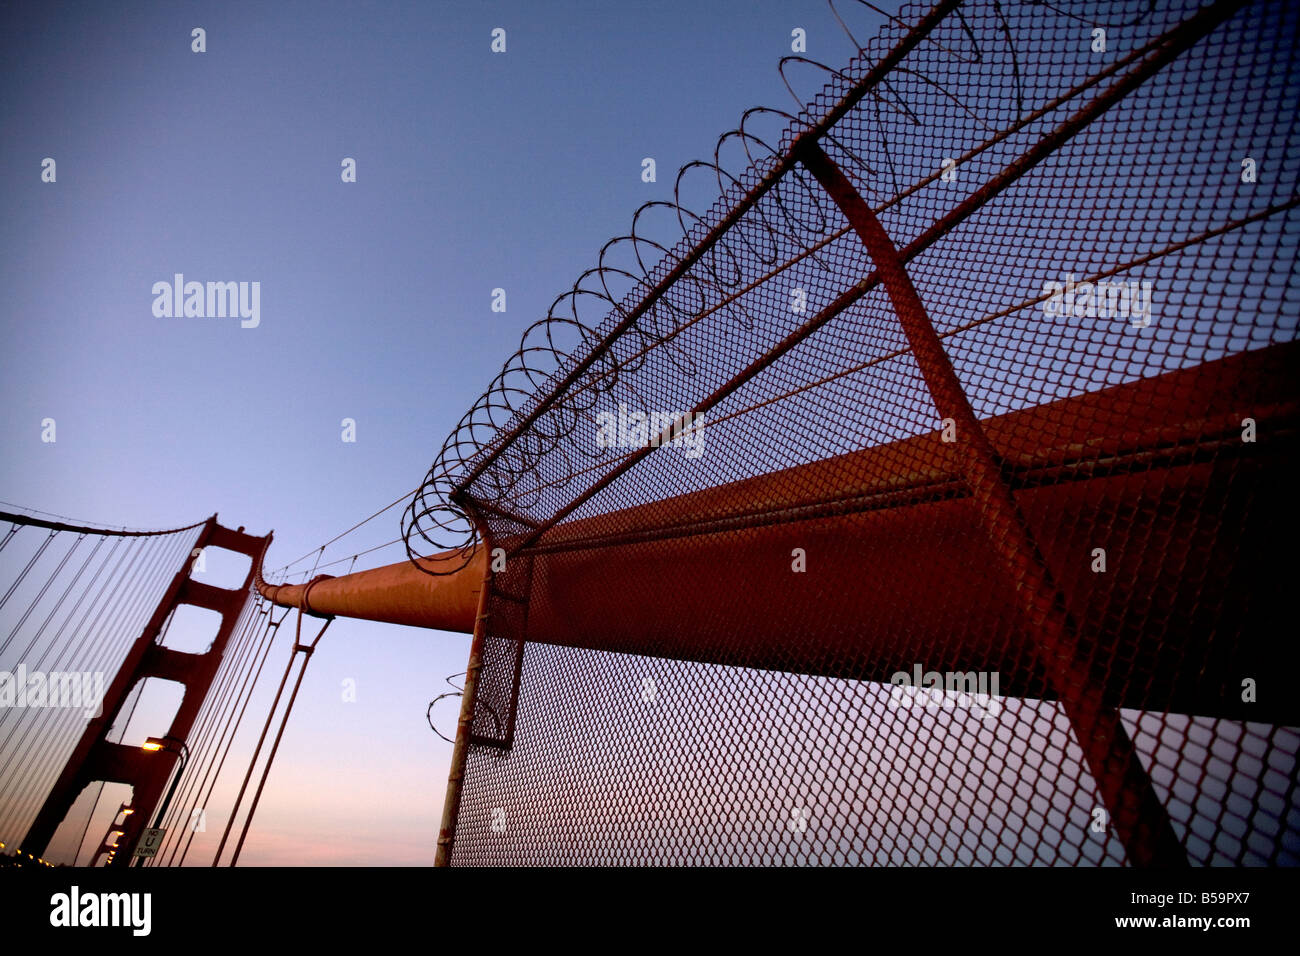 View looking up suspension cable with barbed wire, Golden Gate Bridge Stock Photo